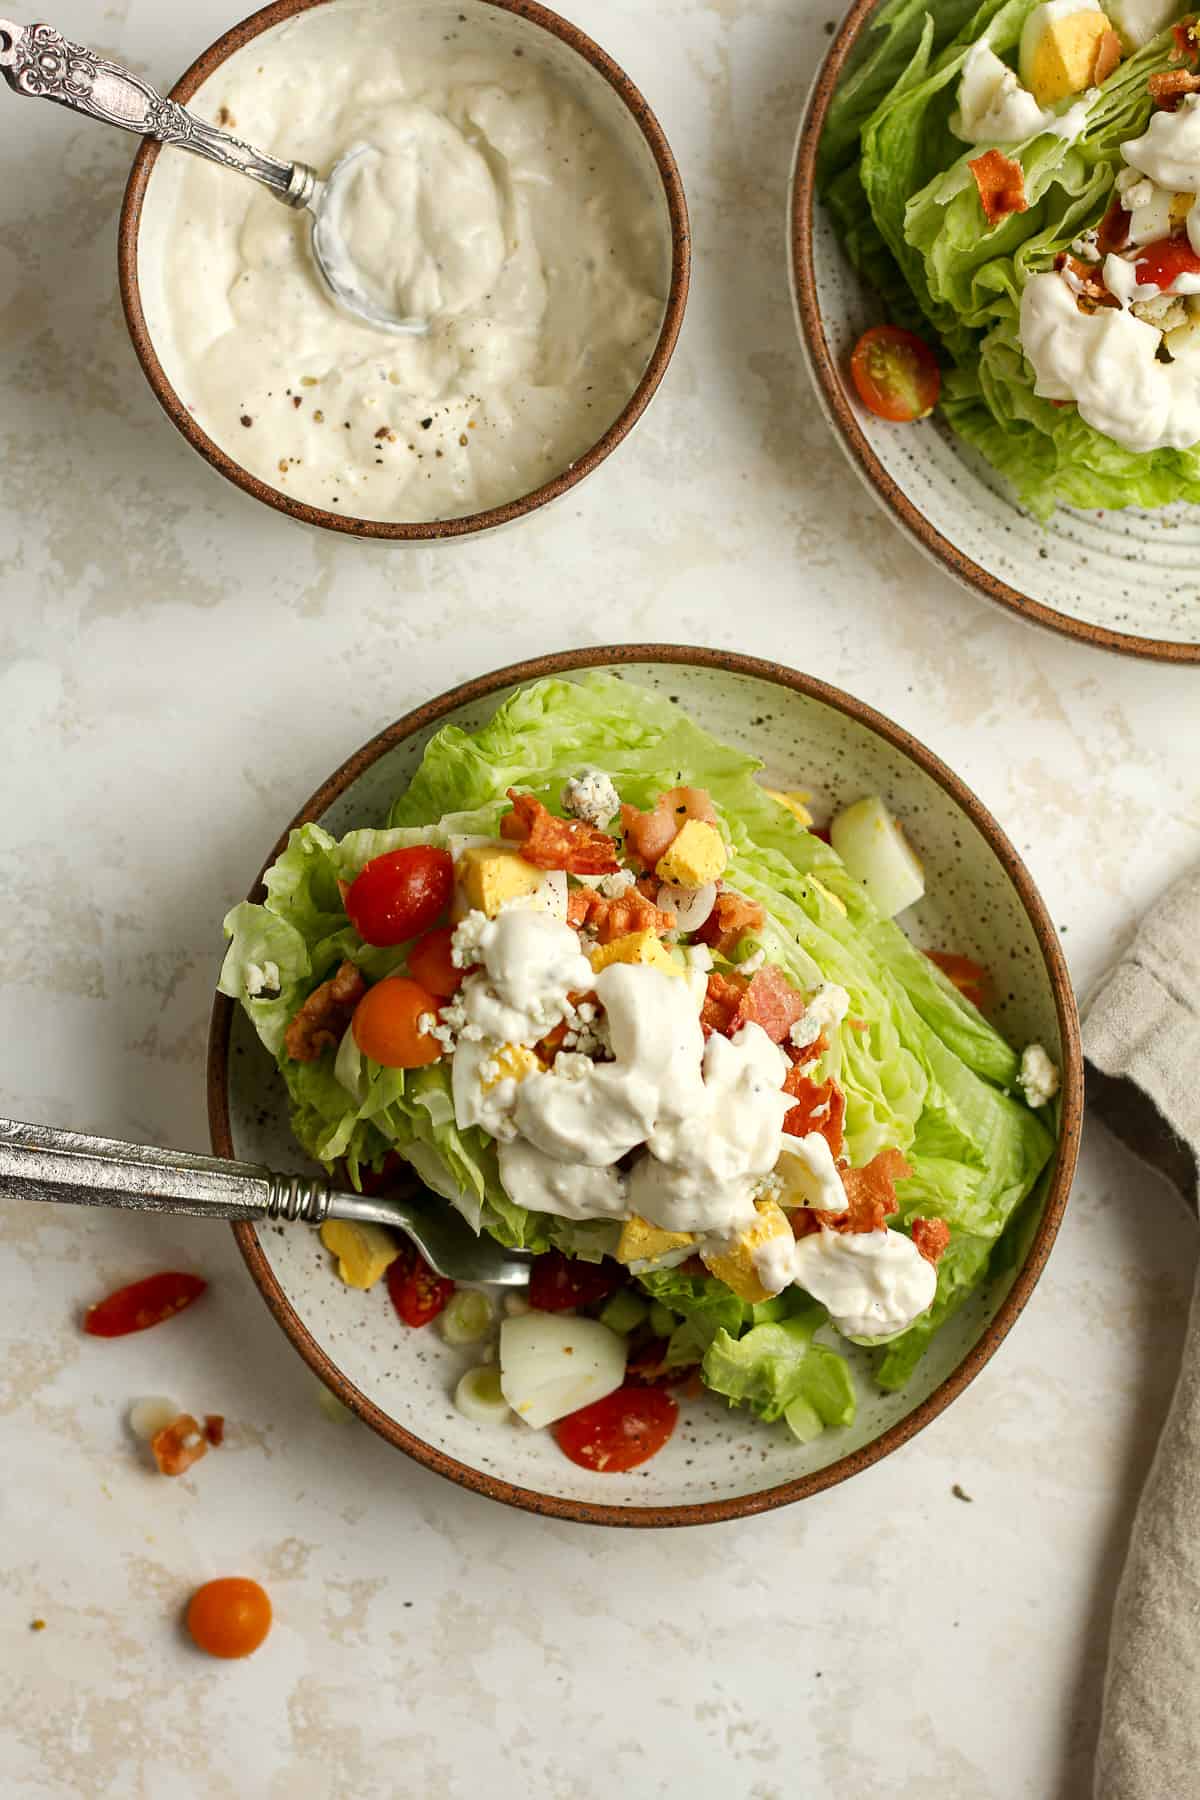 Two bowls of wedge salad with toppings and blue cheese dressing.